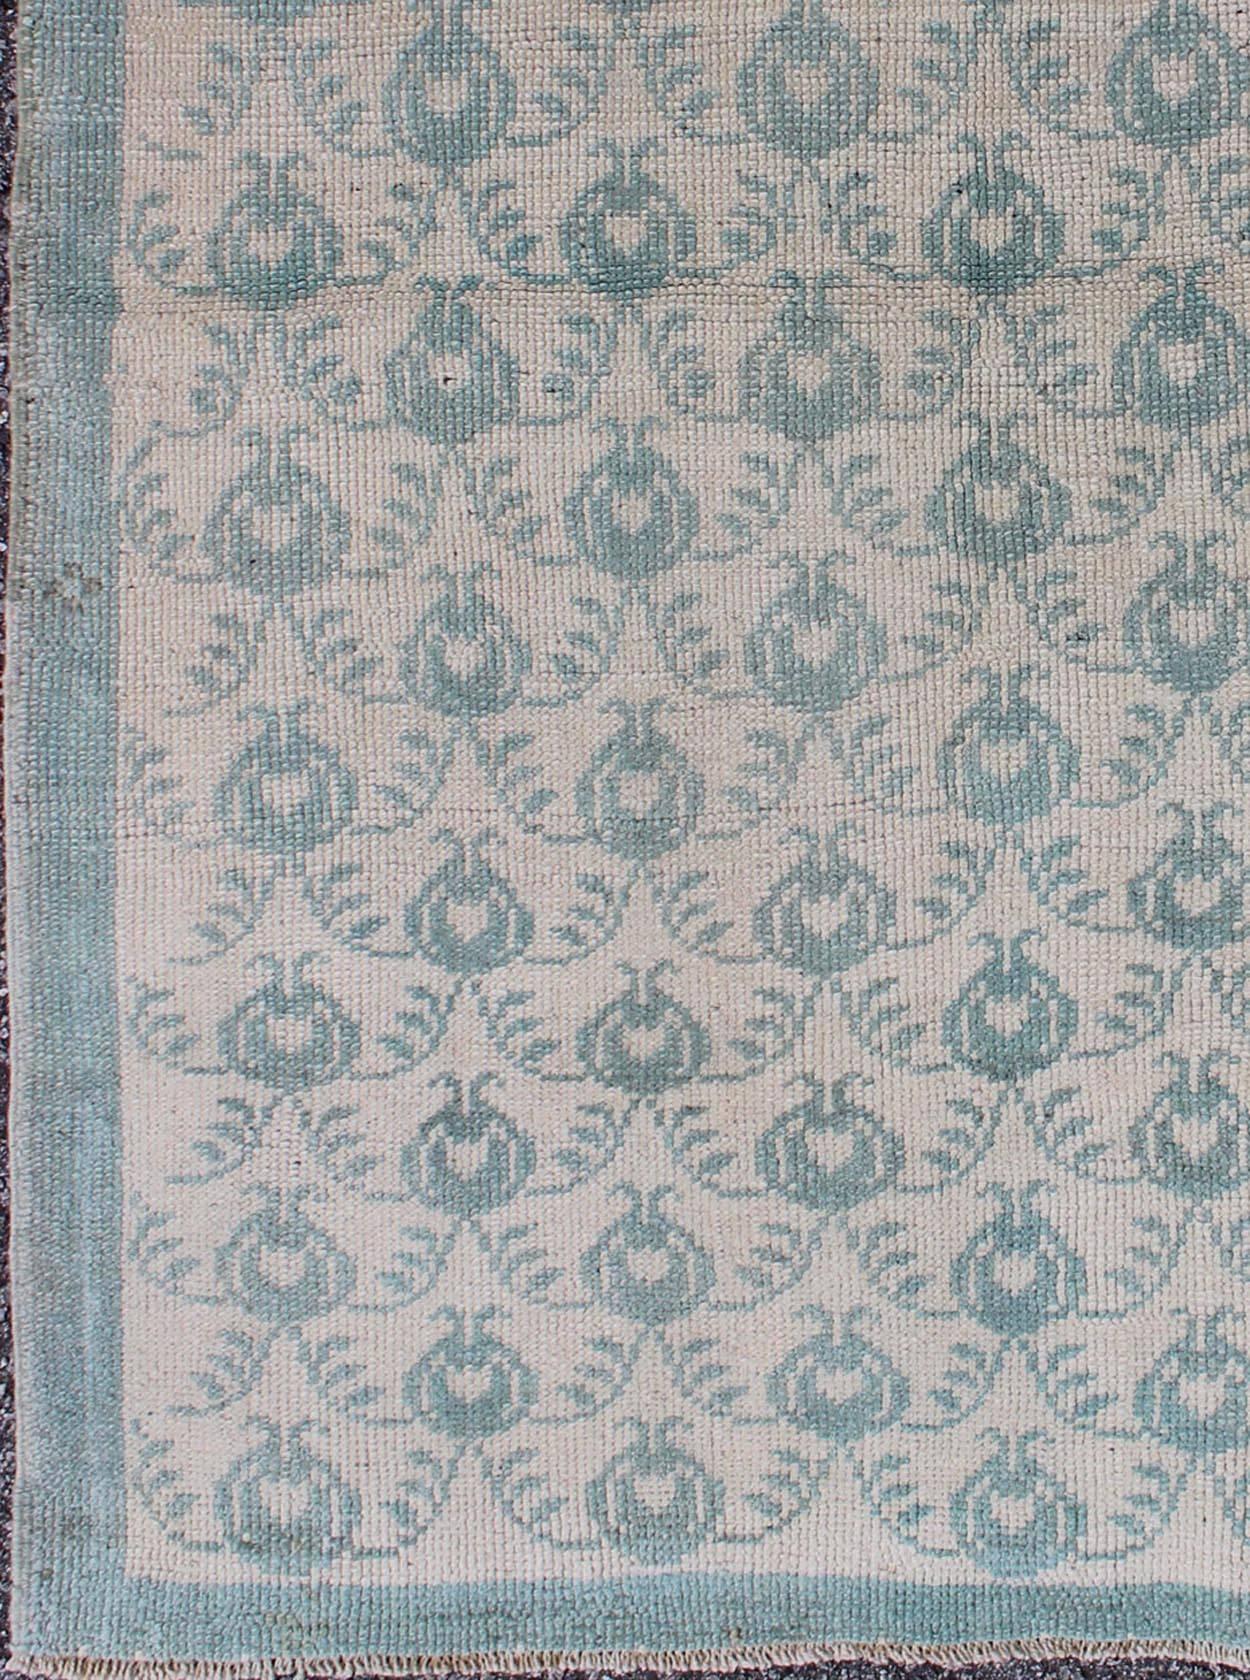 Ivory background vintage Turkish Oushak rug with all-over design in light blue, rug ihs-95155, country of origin type: Turkey Oushak, circa mid-20th century.

This Tulu carpet (circa mid-20th century) features an all-over pattern of interconnected,